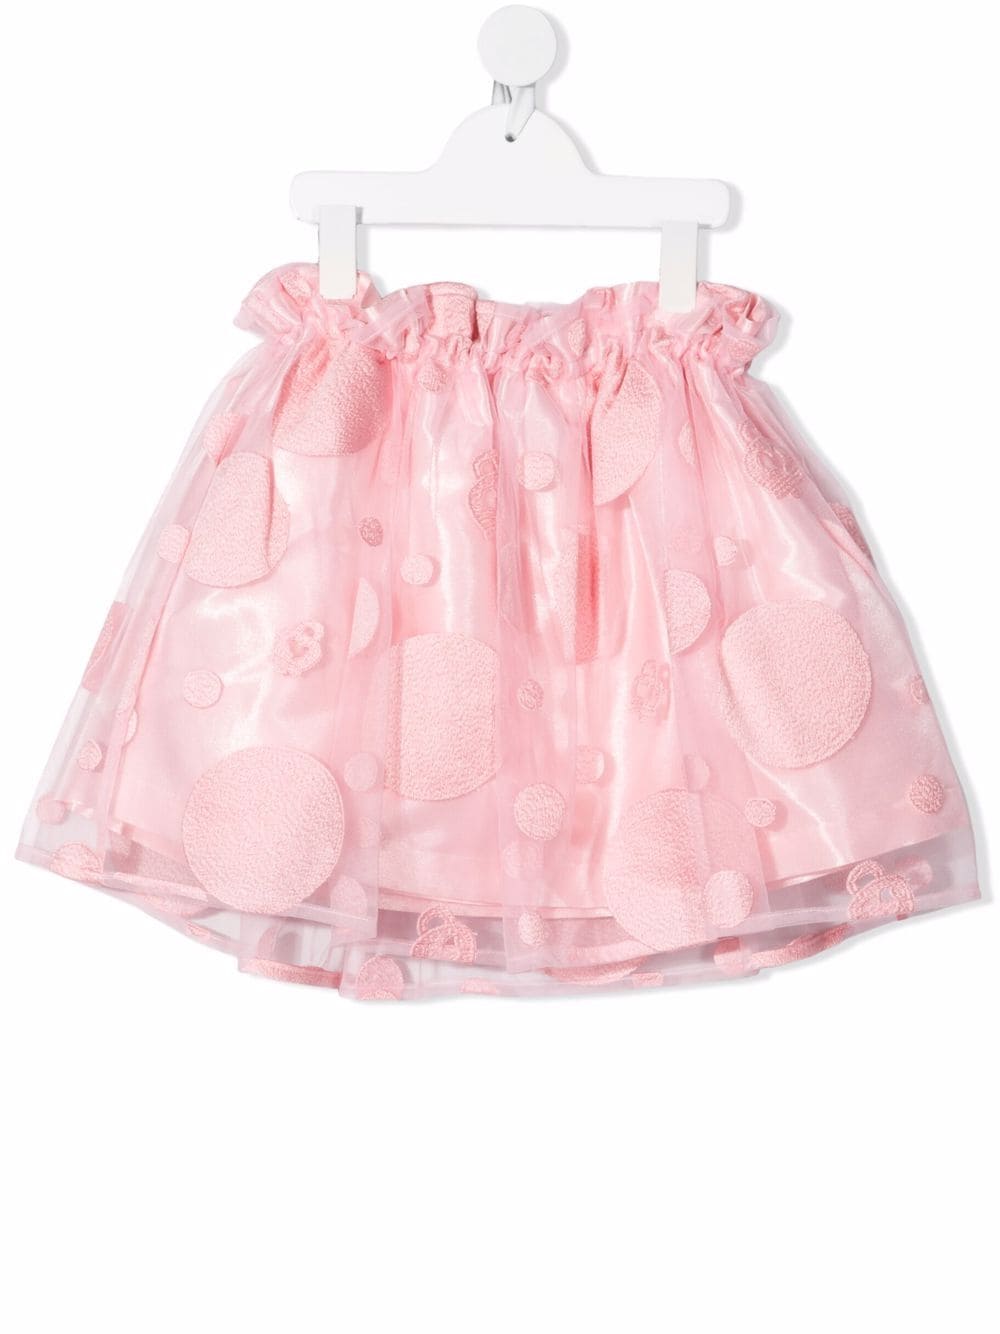 Simonetta Kids Skirt In Pink Tulle With Embroidered Polka Dots